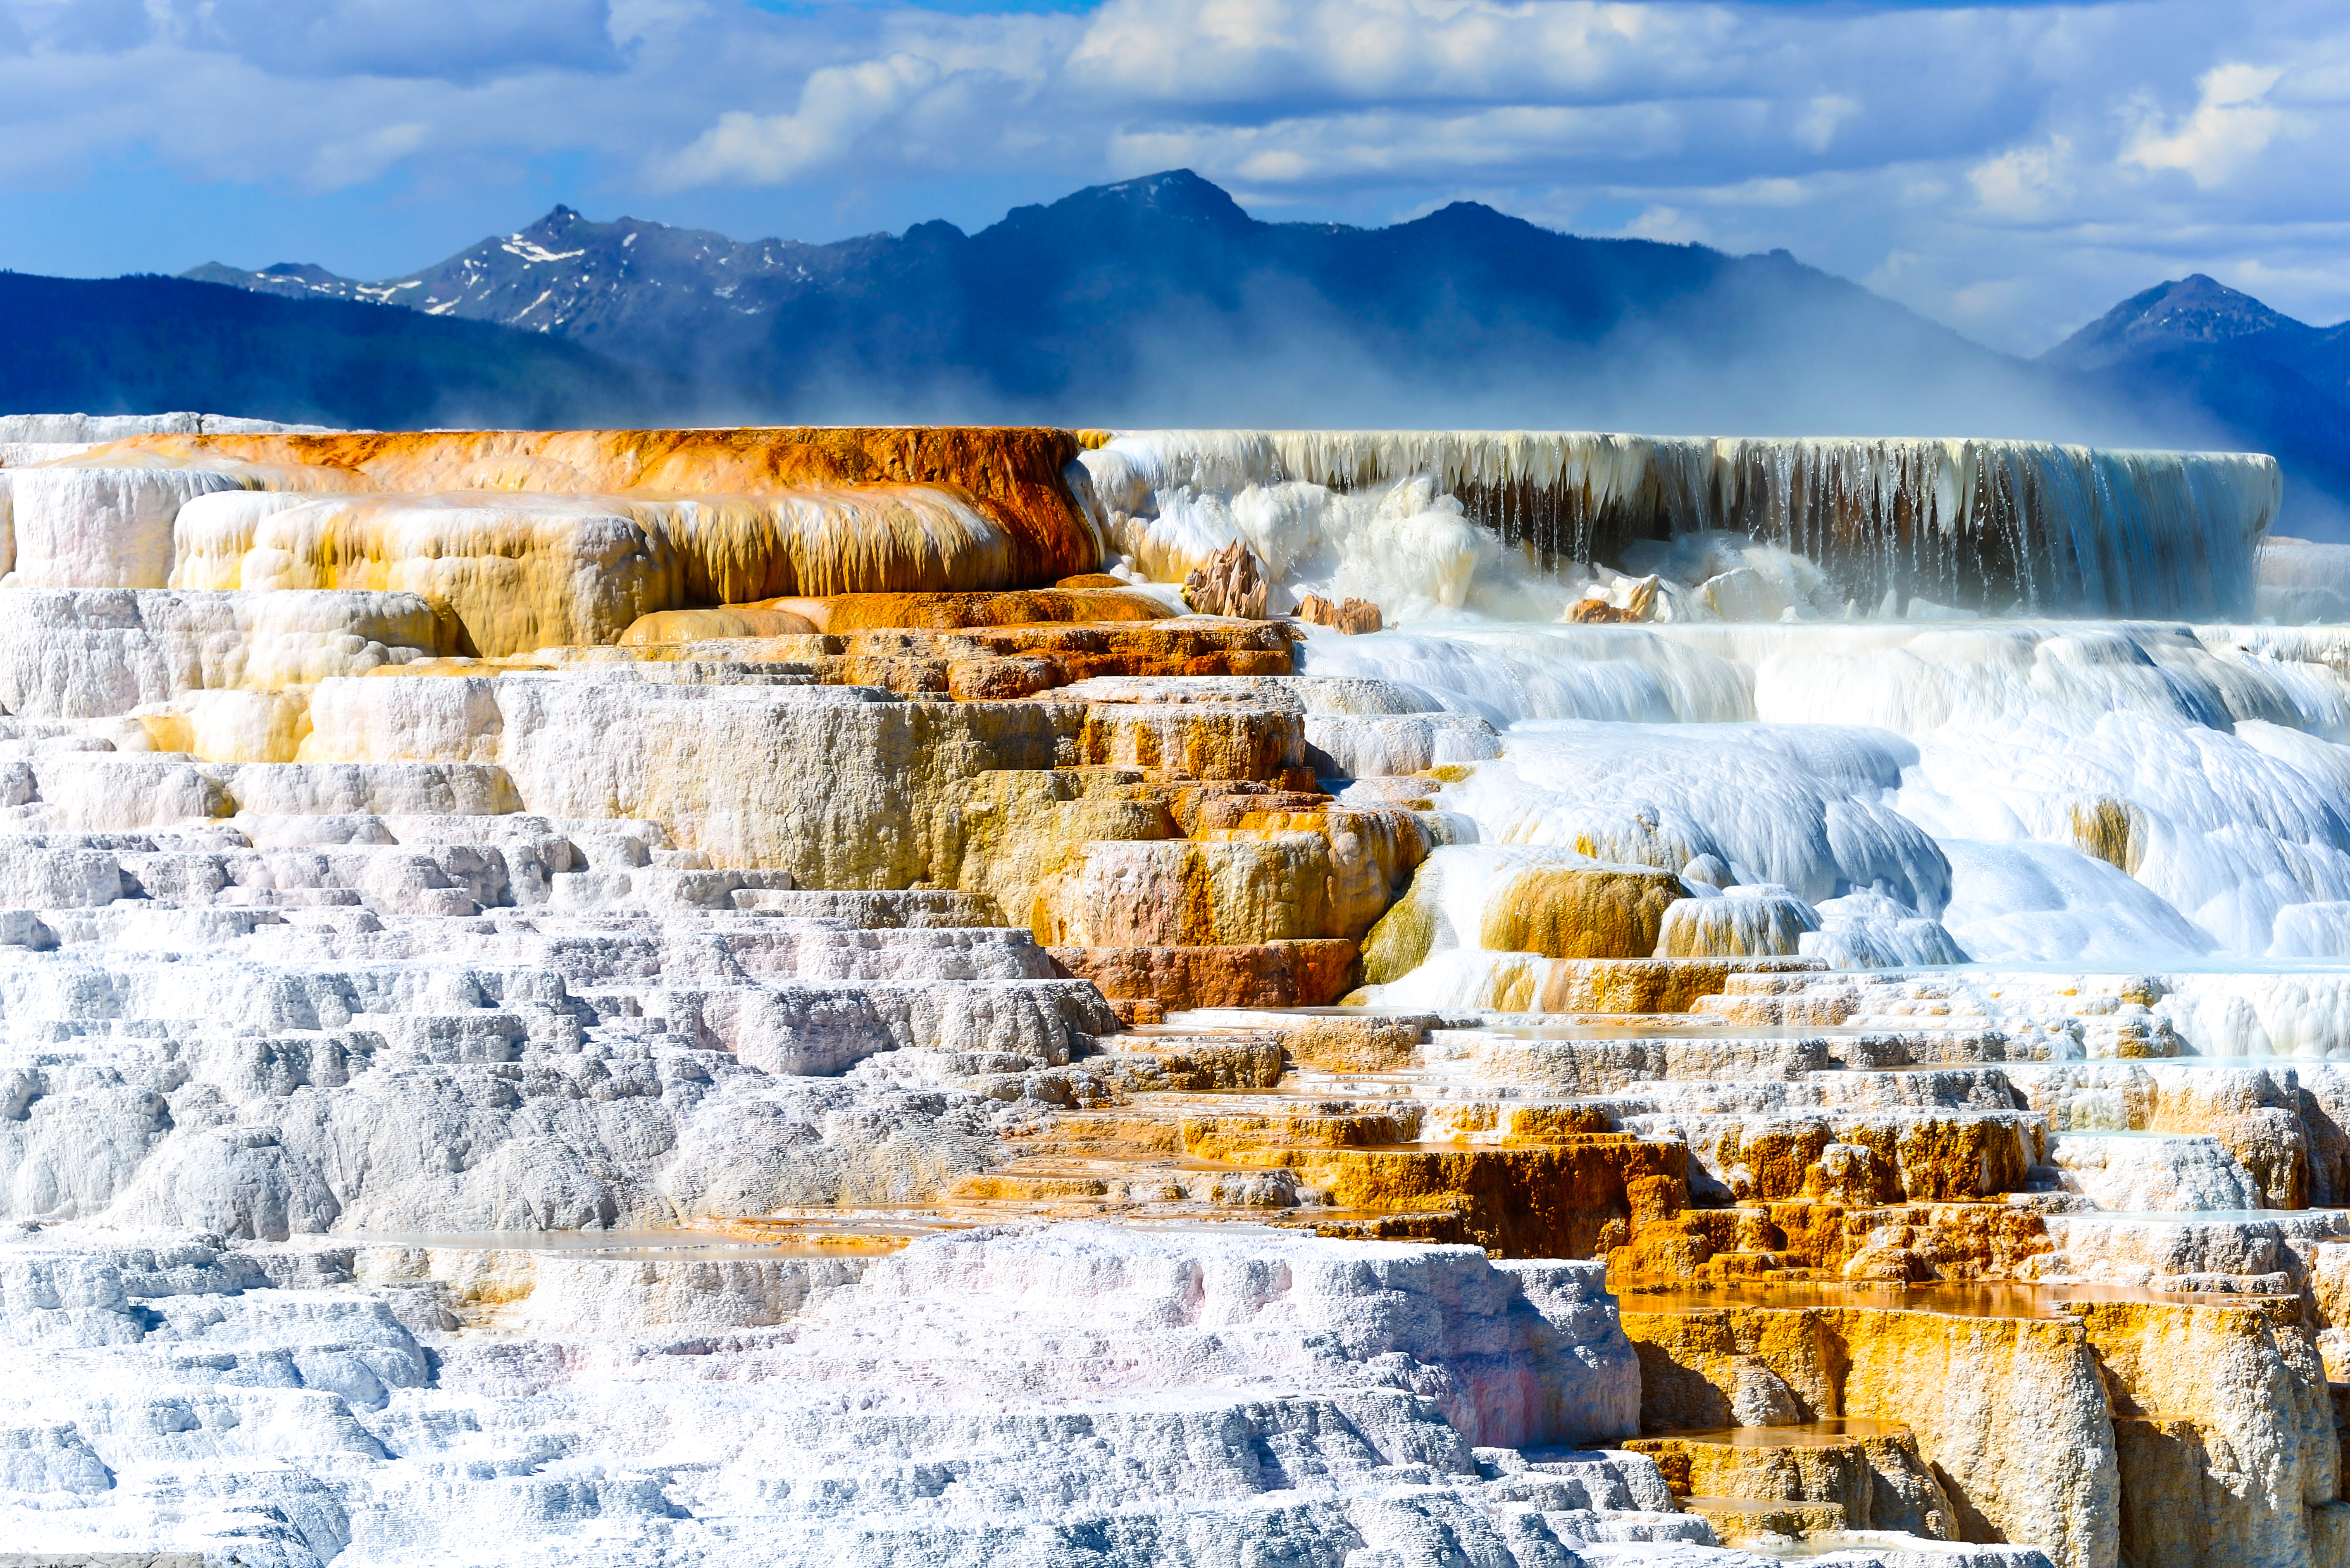 Canary Spring and terraces in the Mammoth Hot Spring area of Yellowstone National Park